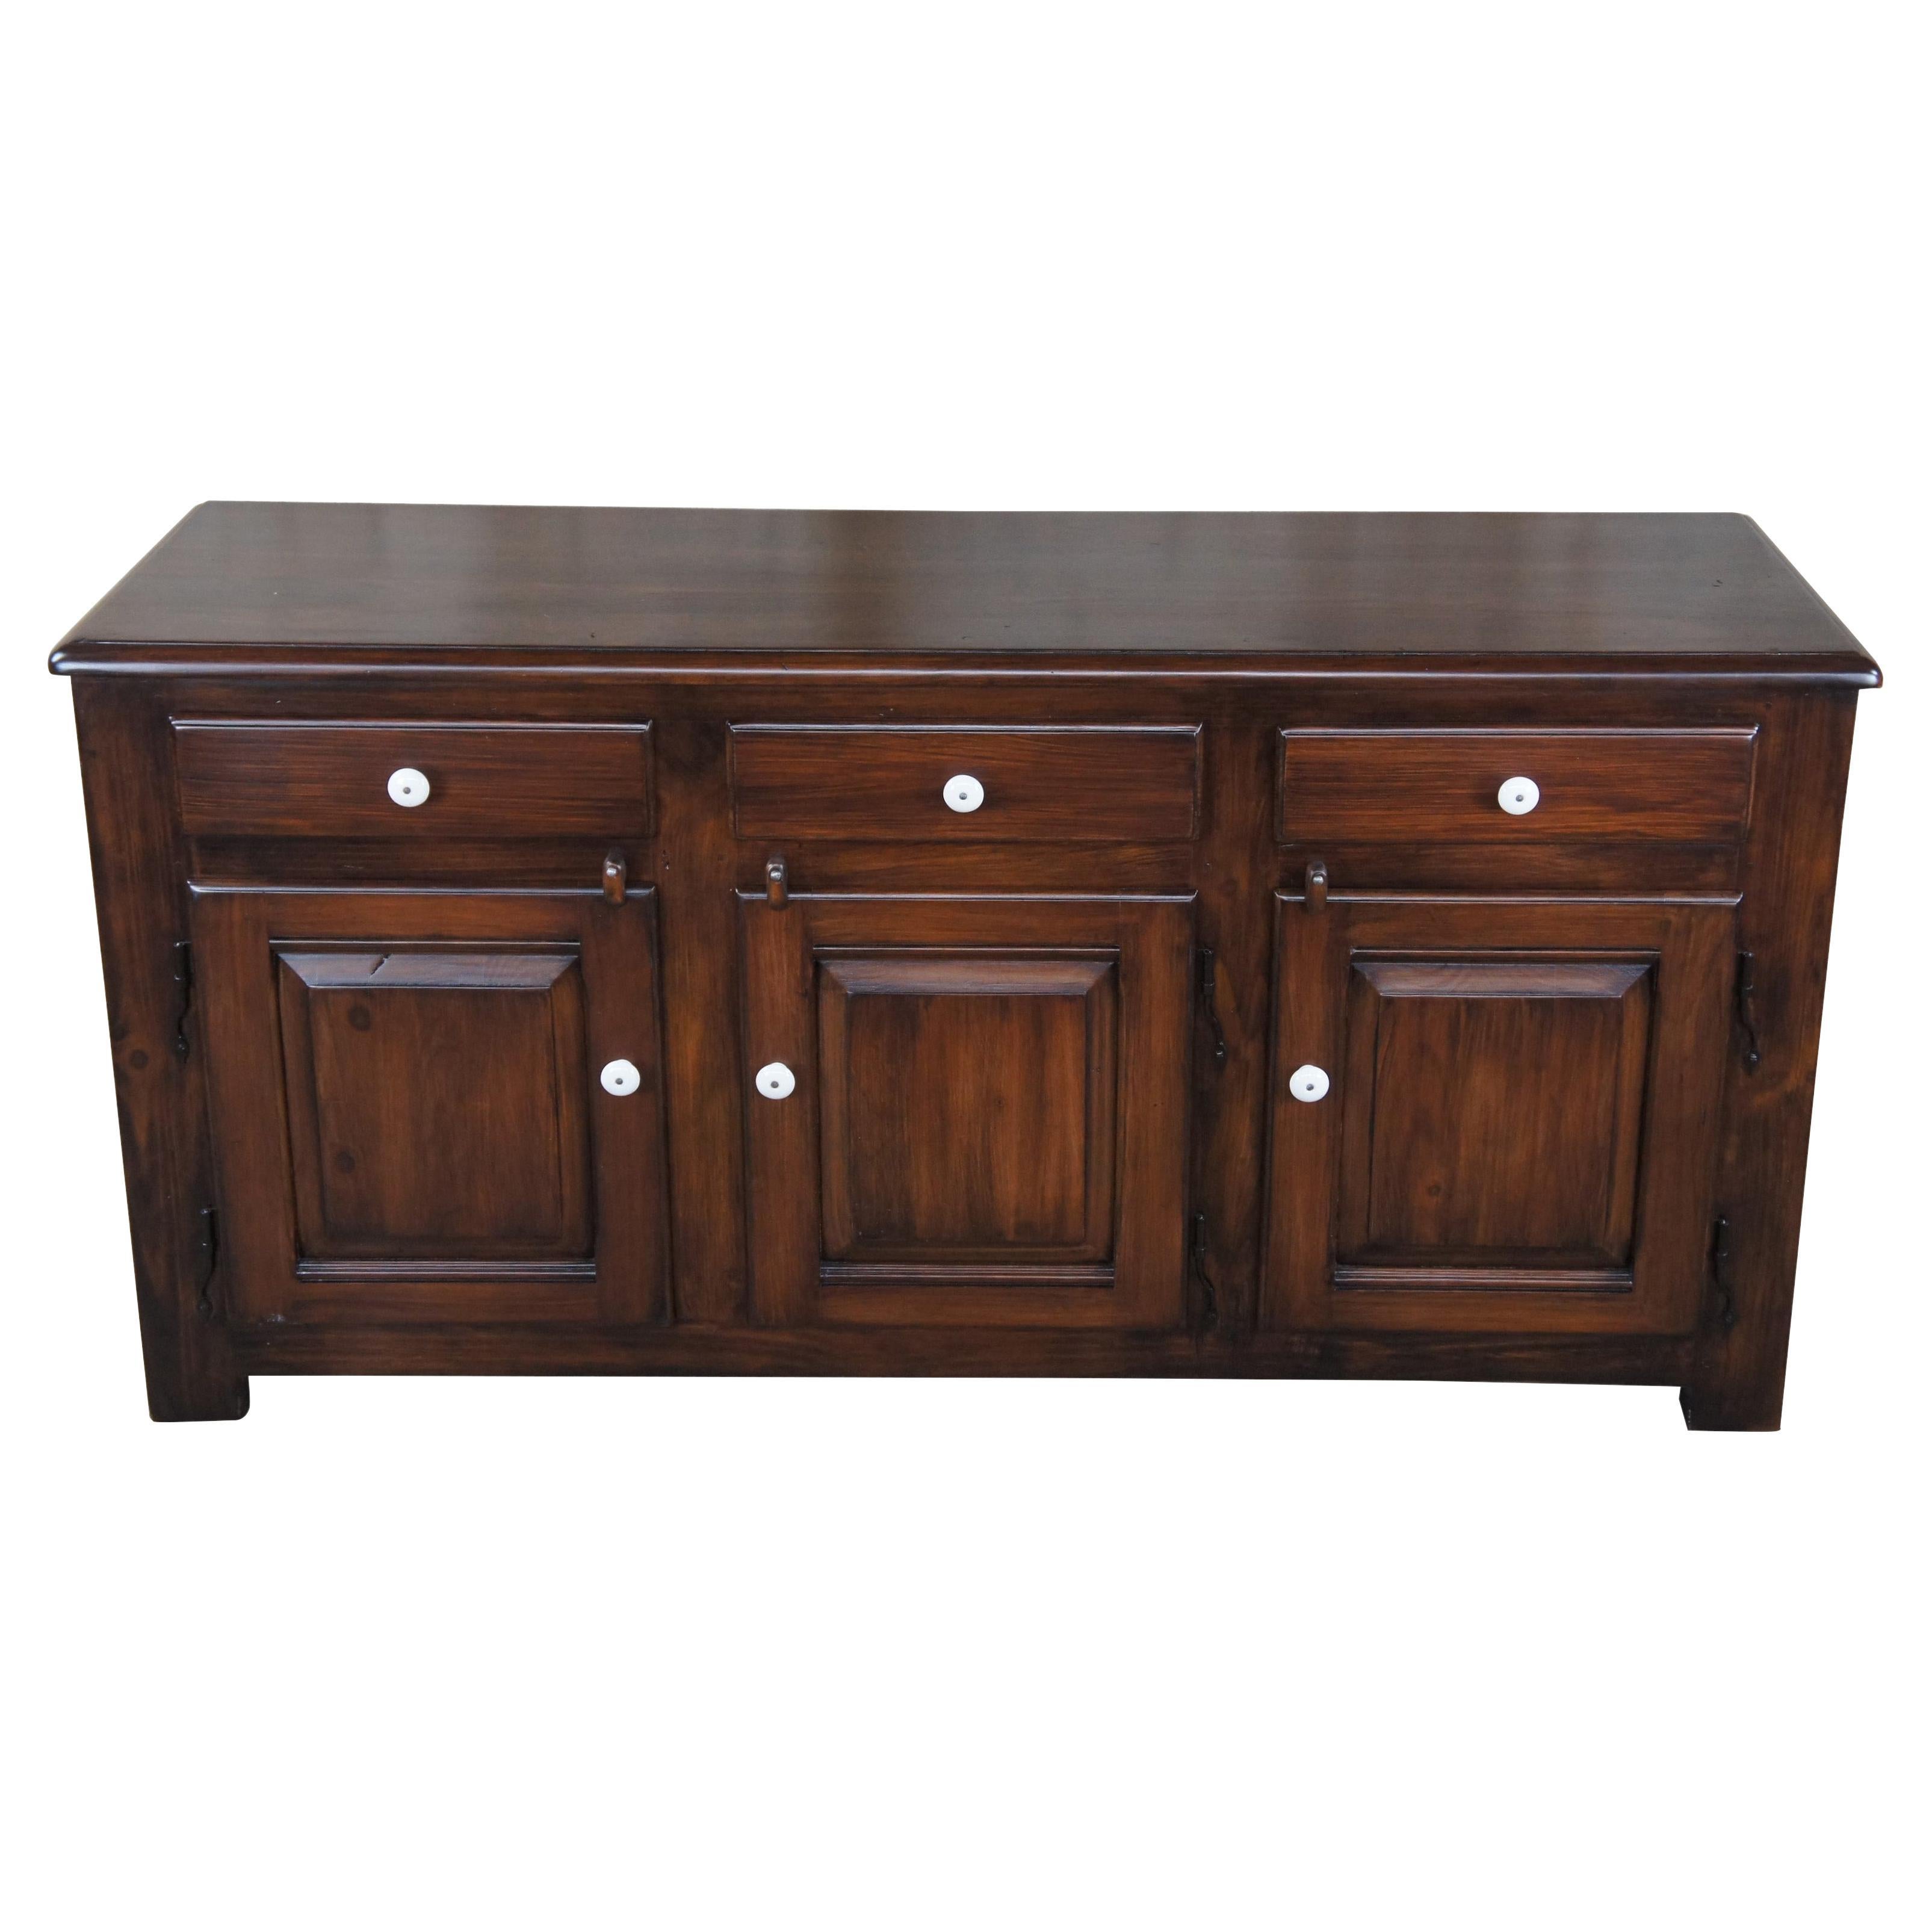 Pine Early American Primitive Farmhouse Sideboard Buffet Console Cabinet 61"